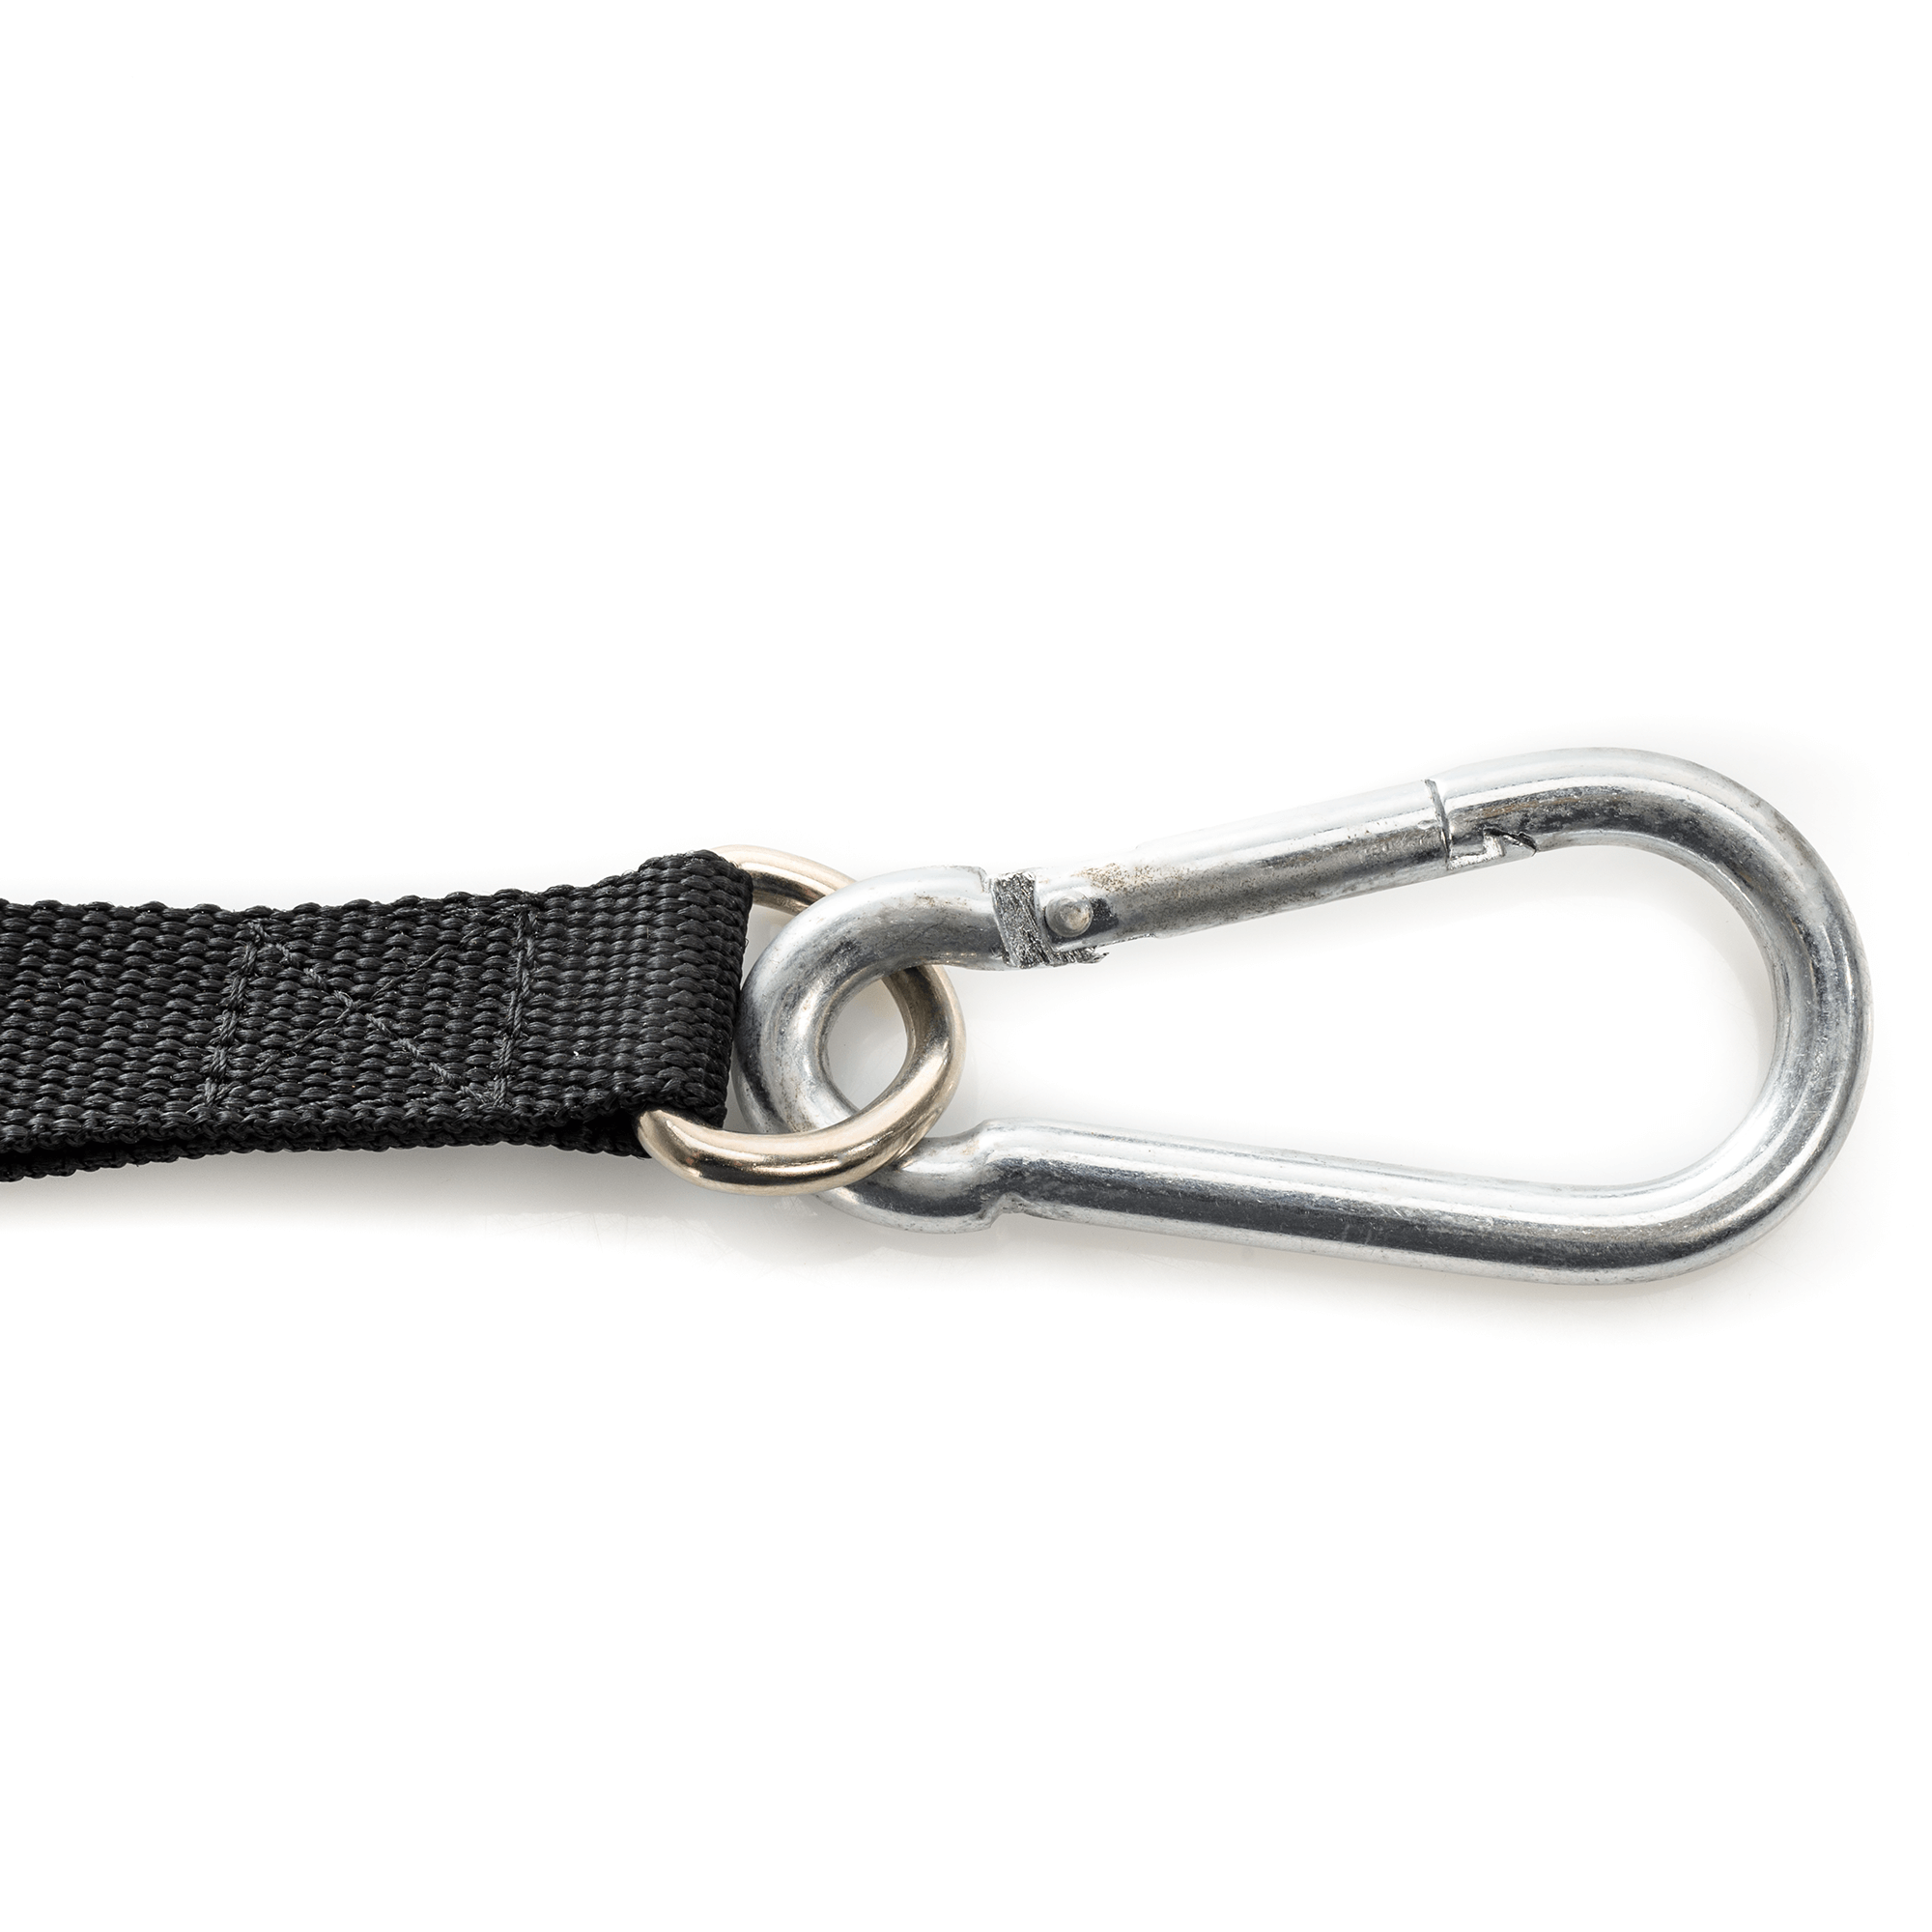 Foot Strap (Fitness product)